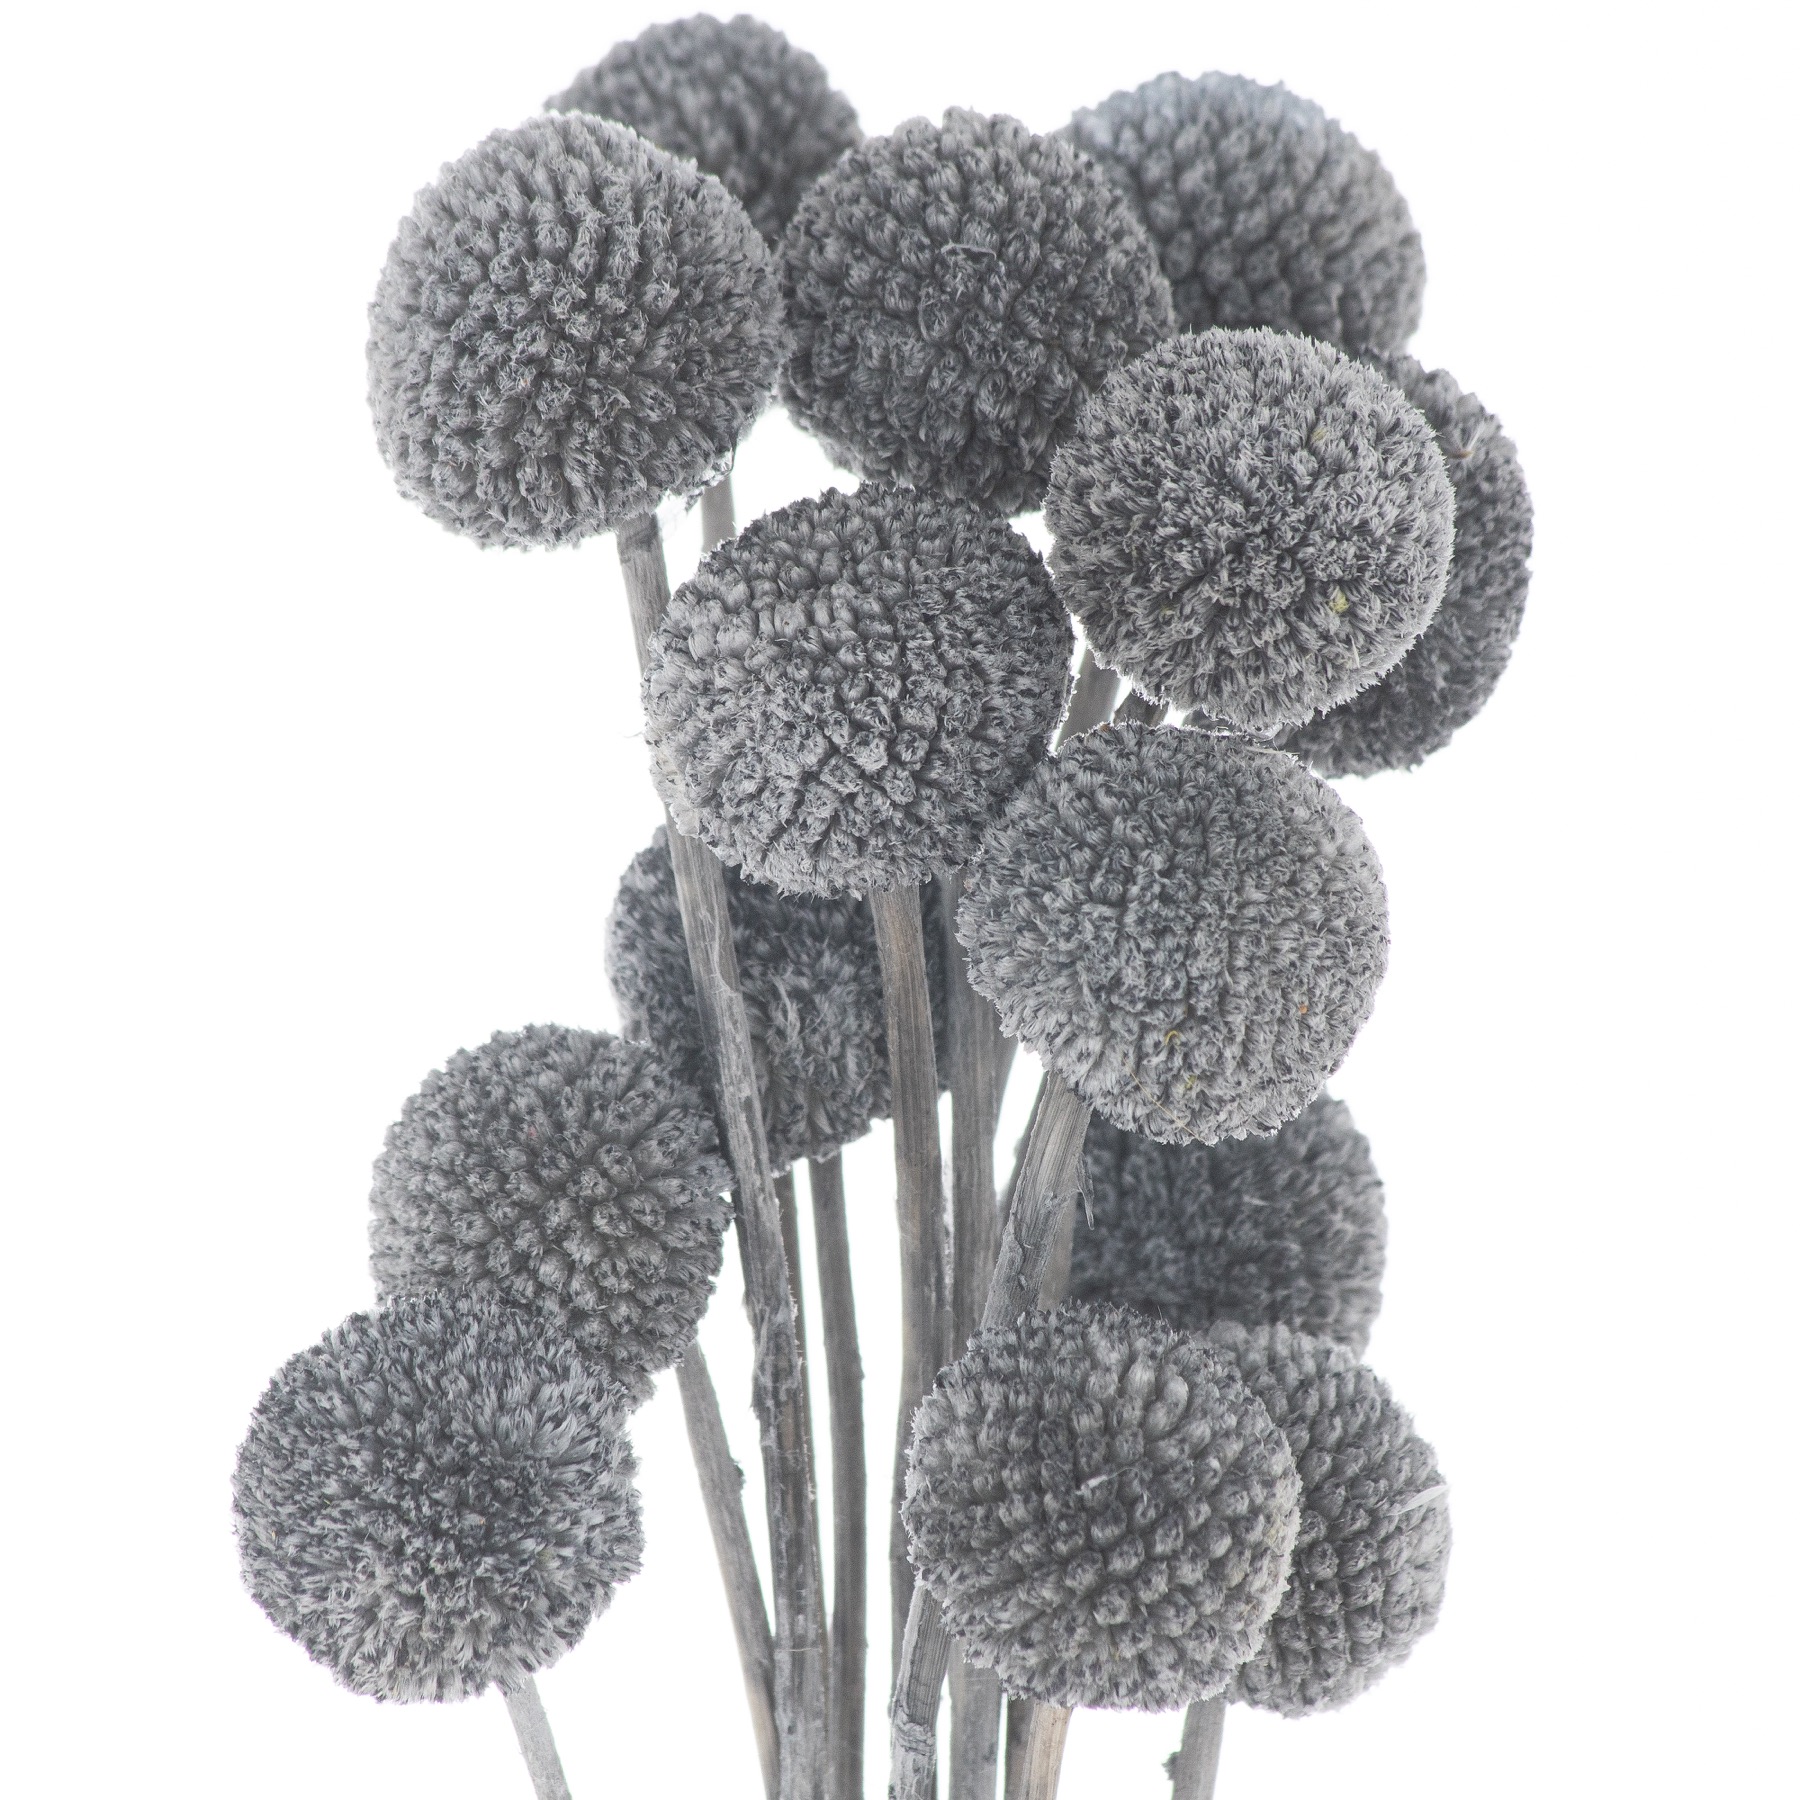 Dried Grey Billy Ball Bunch Of 20 - Image 1